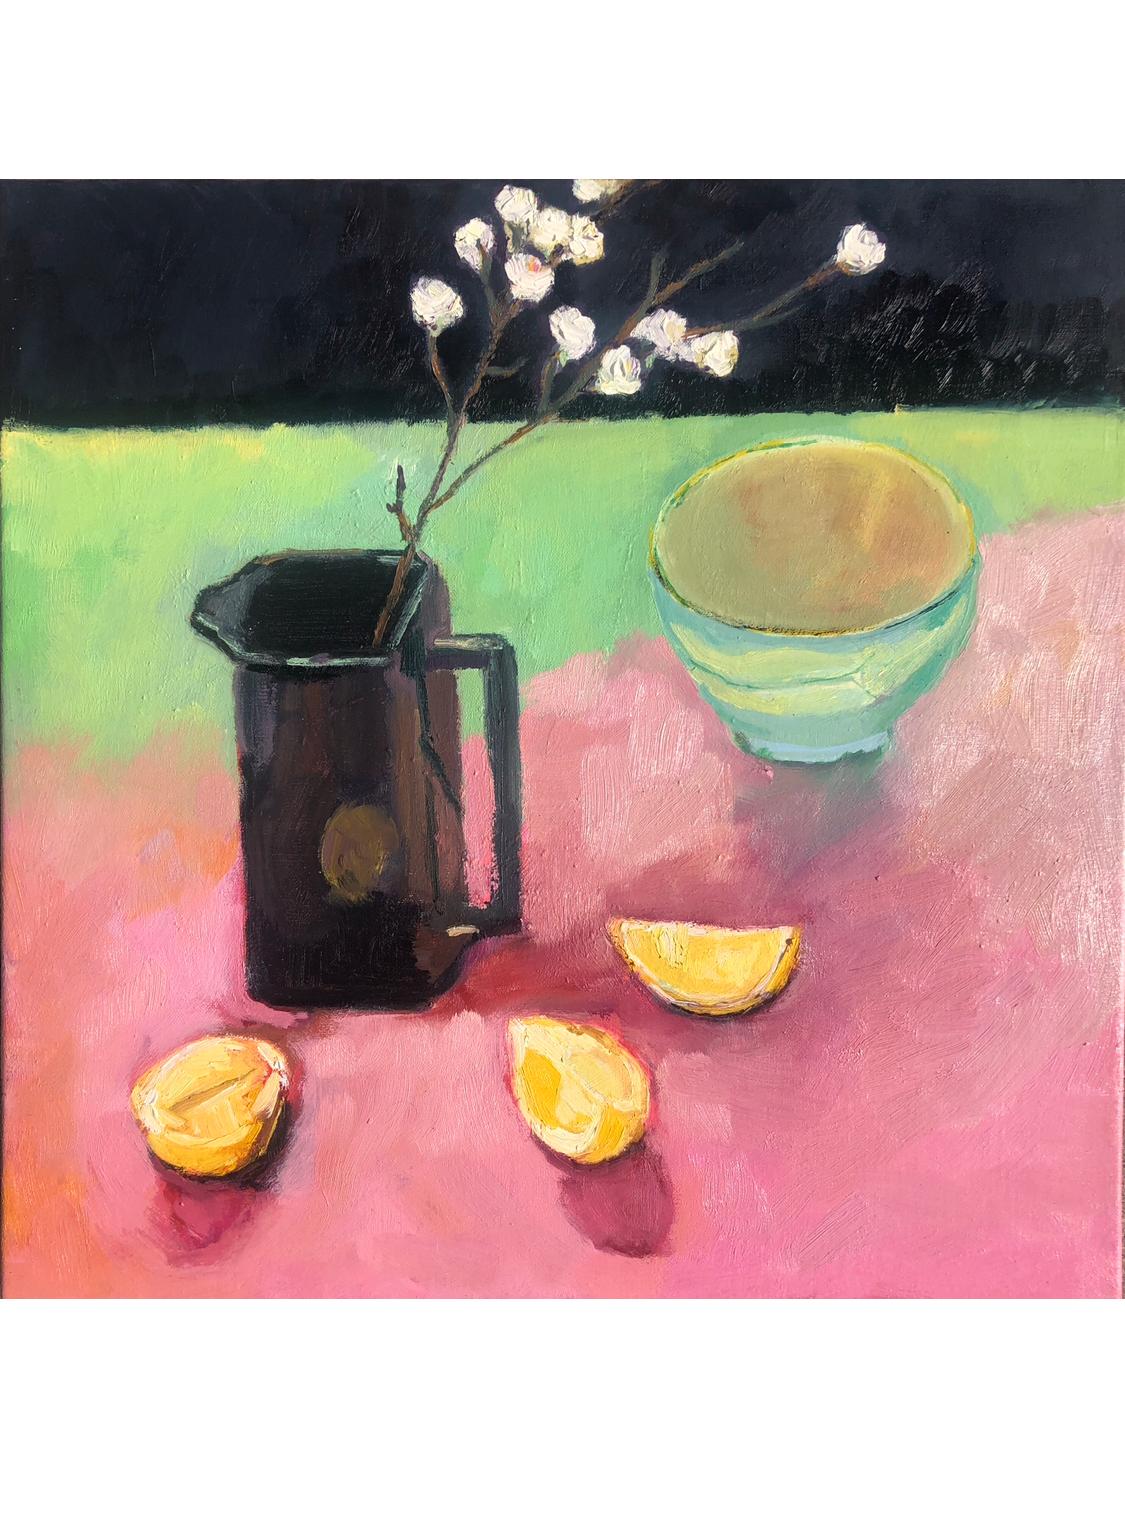 Whisky jug with apple blossom By Maggie LaPorte-Banks [2022]

This impressionistic still life features the black whisky jug, traditionally used for storing moonshine. I love this old black whisky jug as it shows off so well the reflections of the